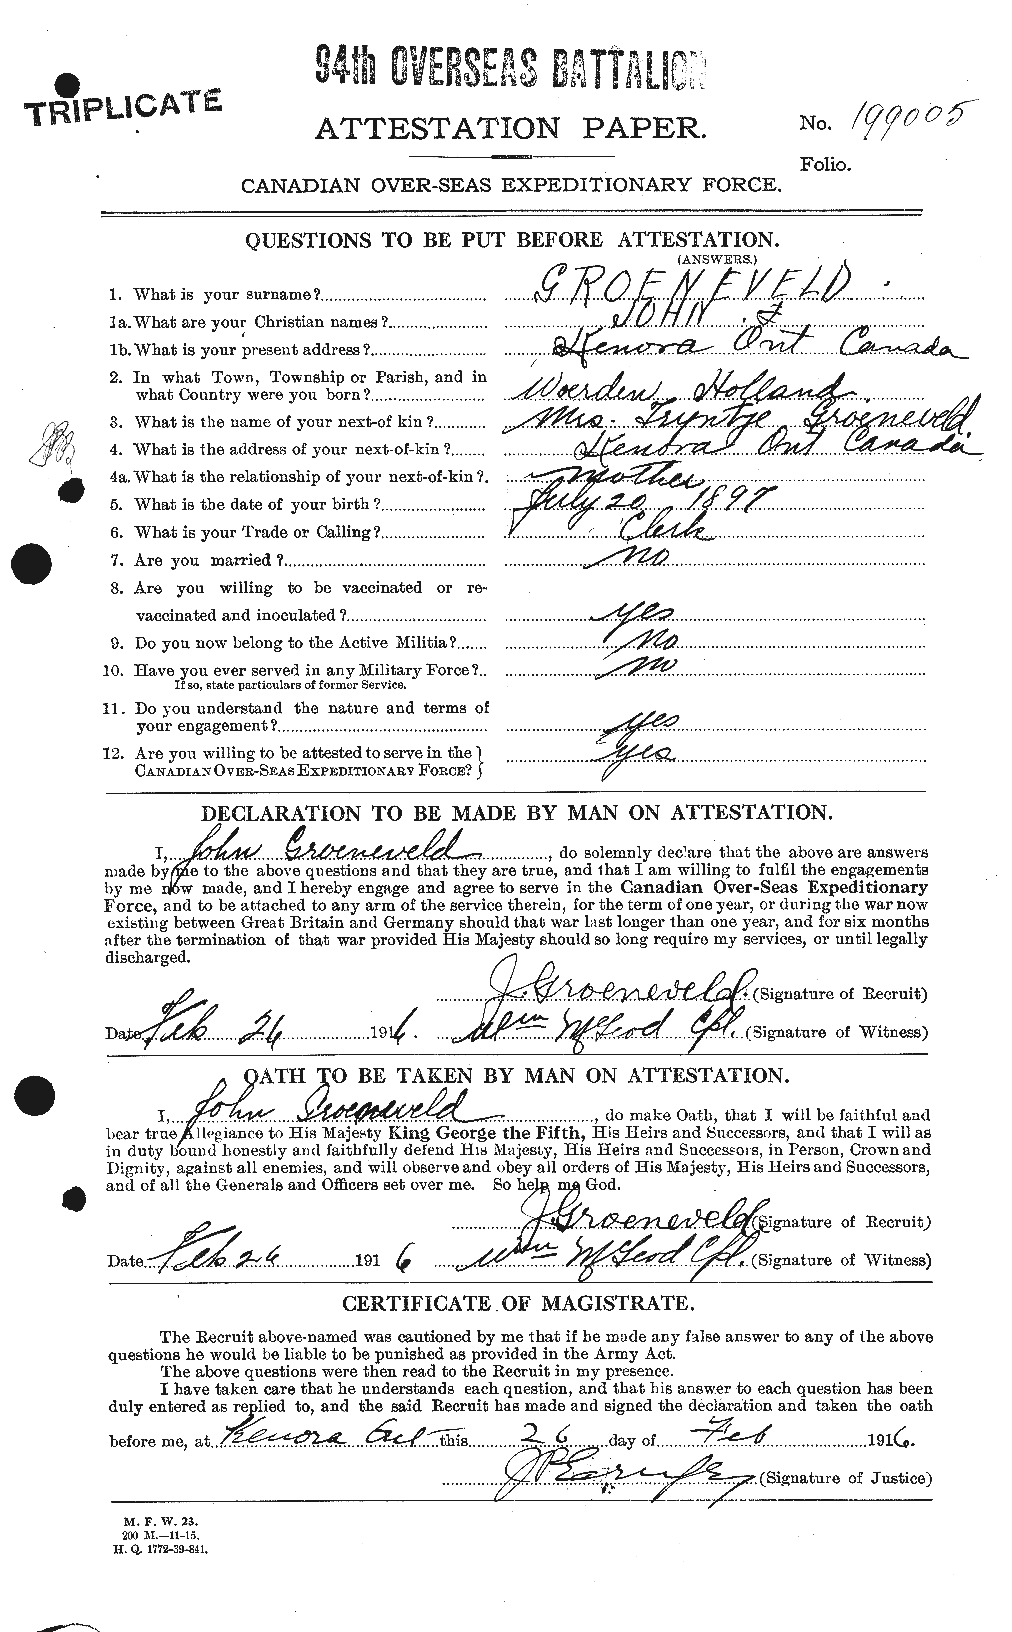 Personnel Records of the First World War - CEF 371699a